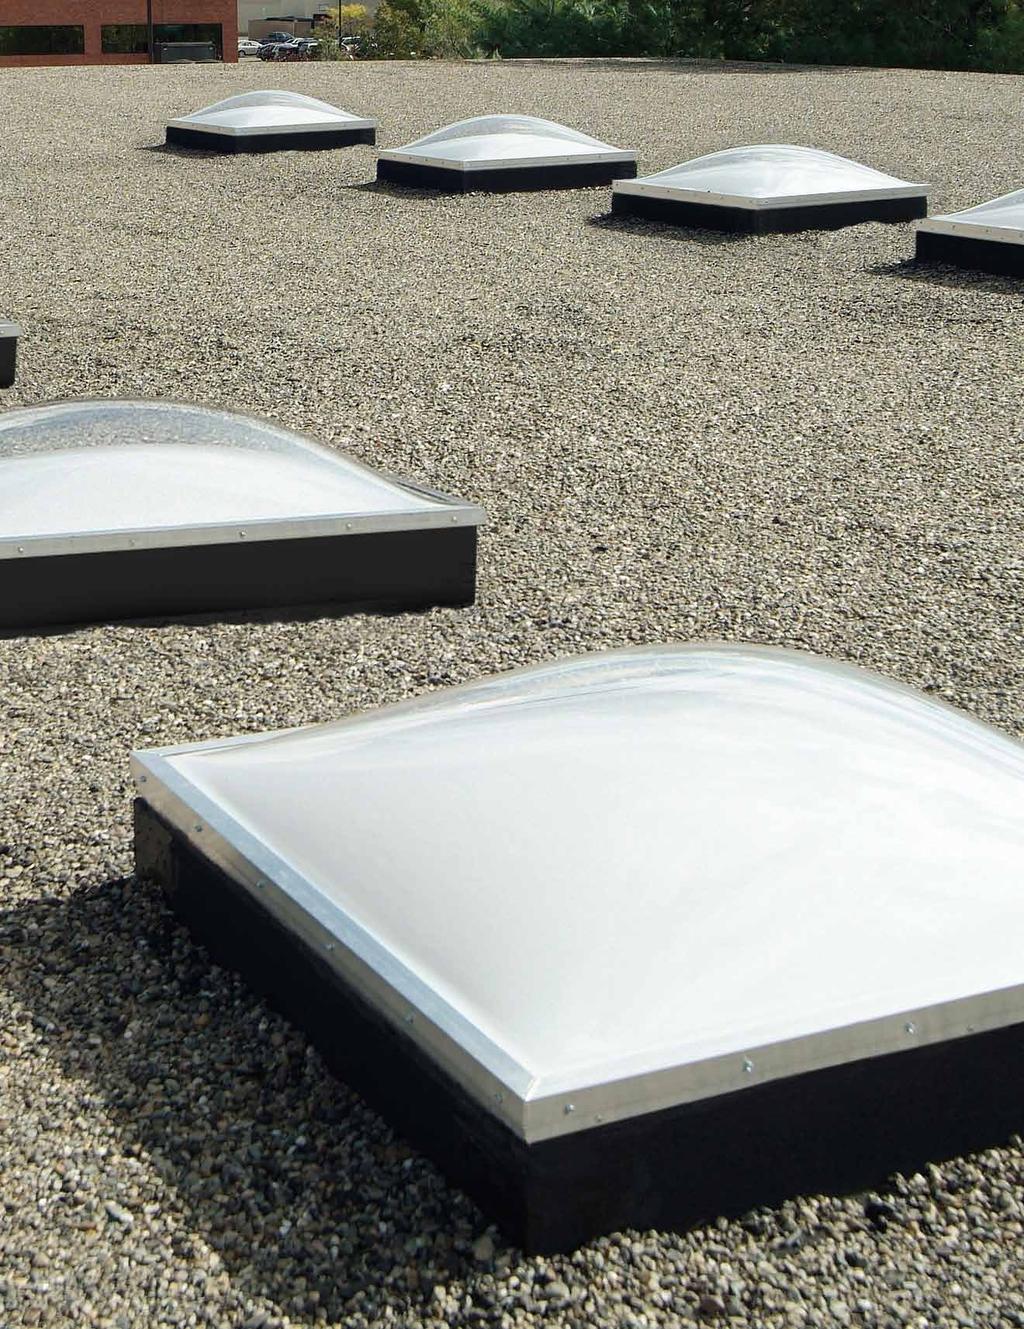 (8) CM dome skylight with clear over white acrylic Fall Protection Fall protection was established by OSHA to provide a safe and healthful working environment for men and women, and to limit falls